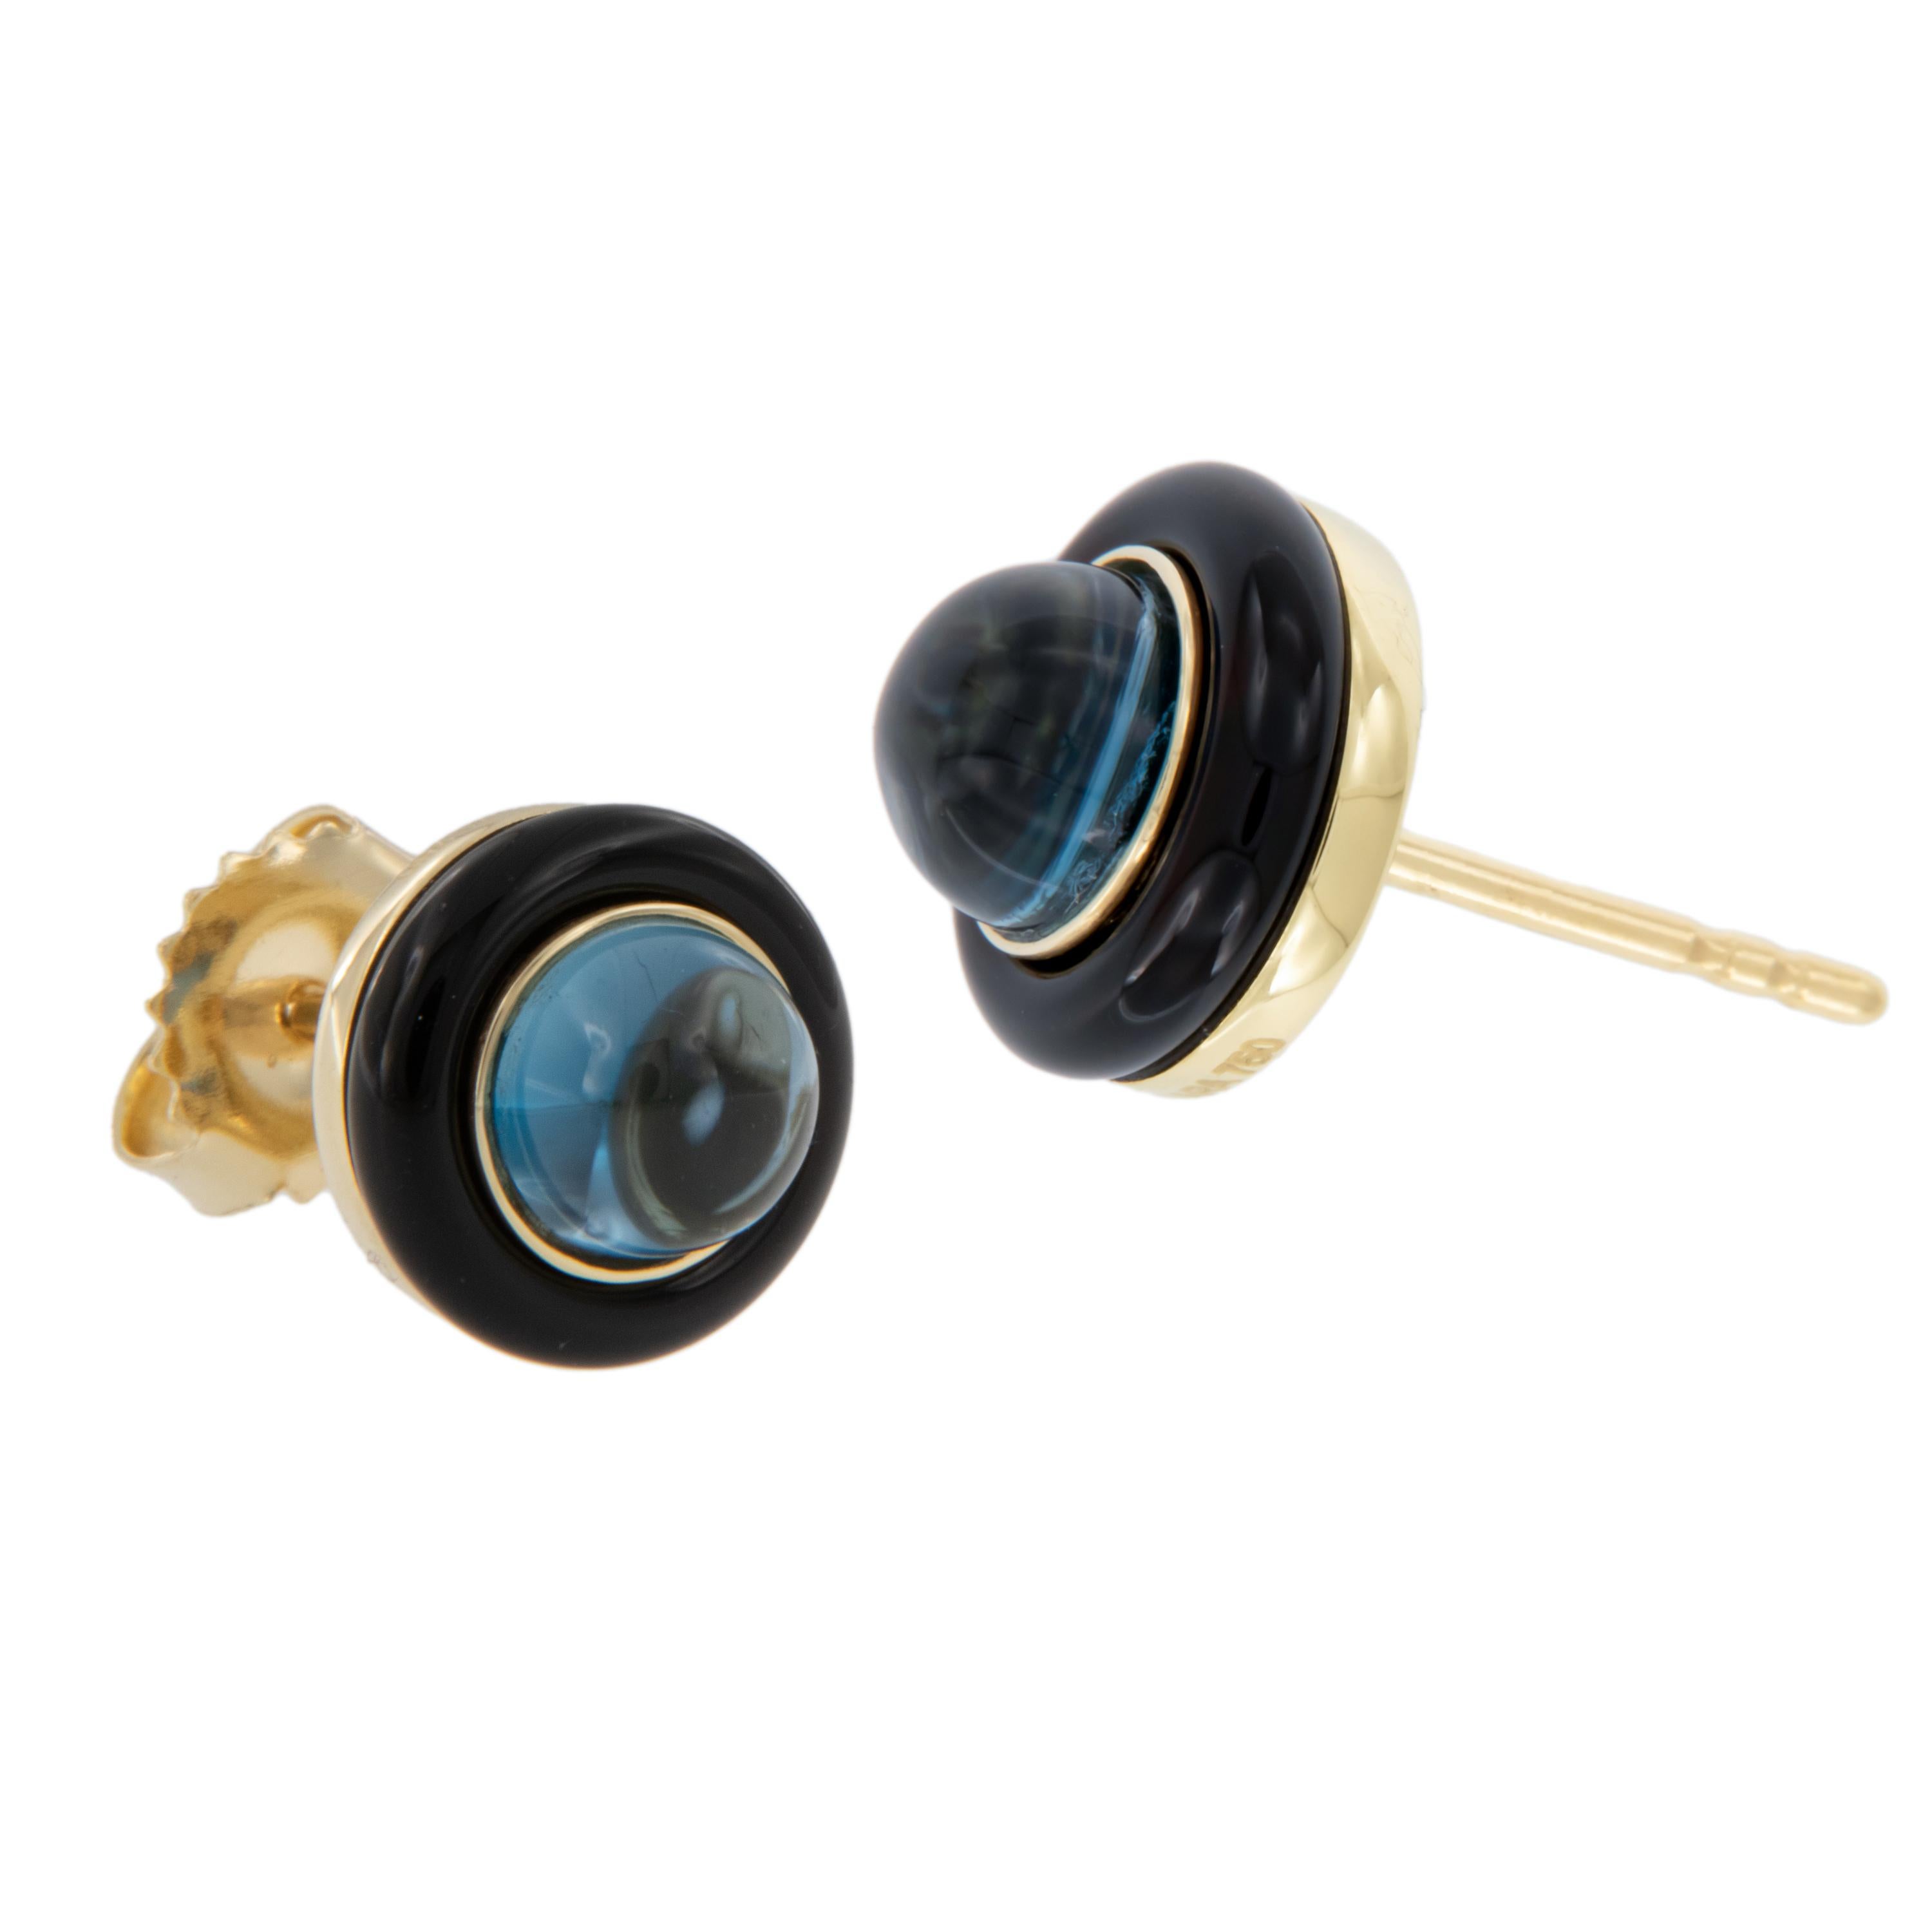 You will love wearing these Limited Edition earrings by Goshwara made from rich 18 karat yellow gold set with 6mm blue topaz cabochon cuts elegantly framed by black onyx for a beautiful contrast! Blue Topaz = 3.02 Cttw, Black onyx = 2.14 Cttw .